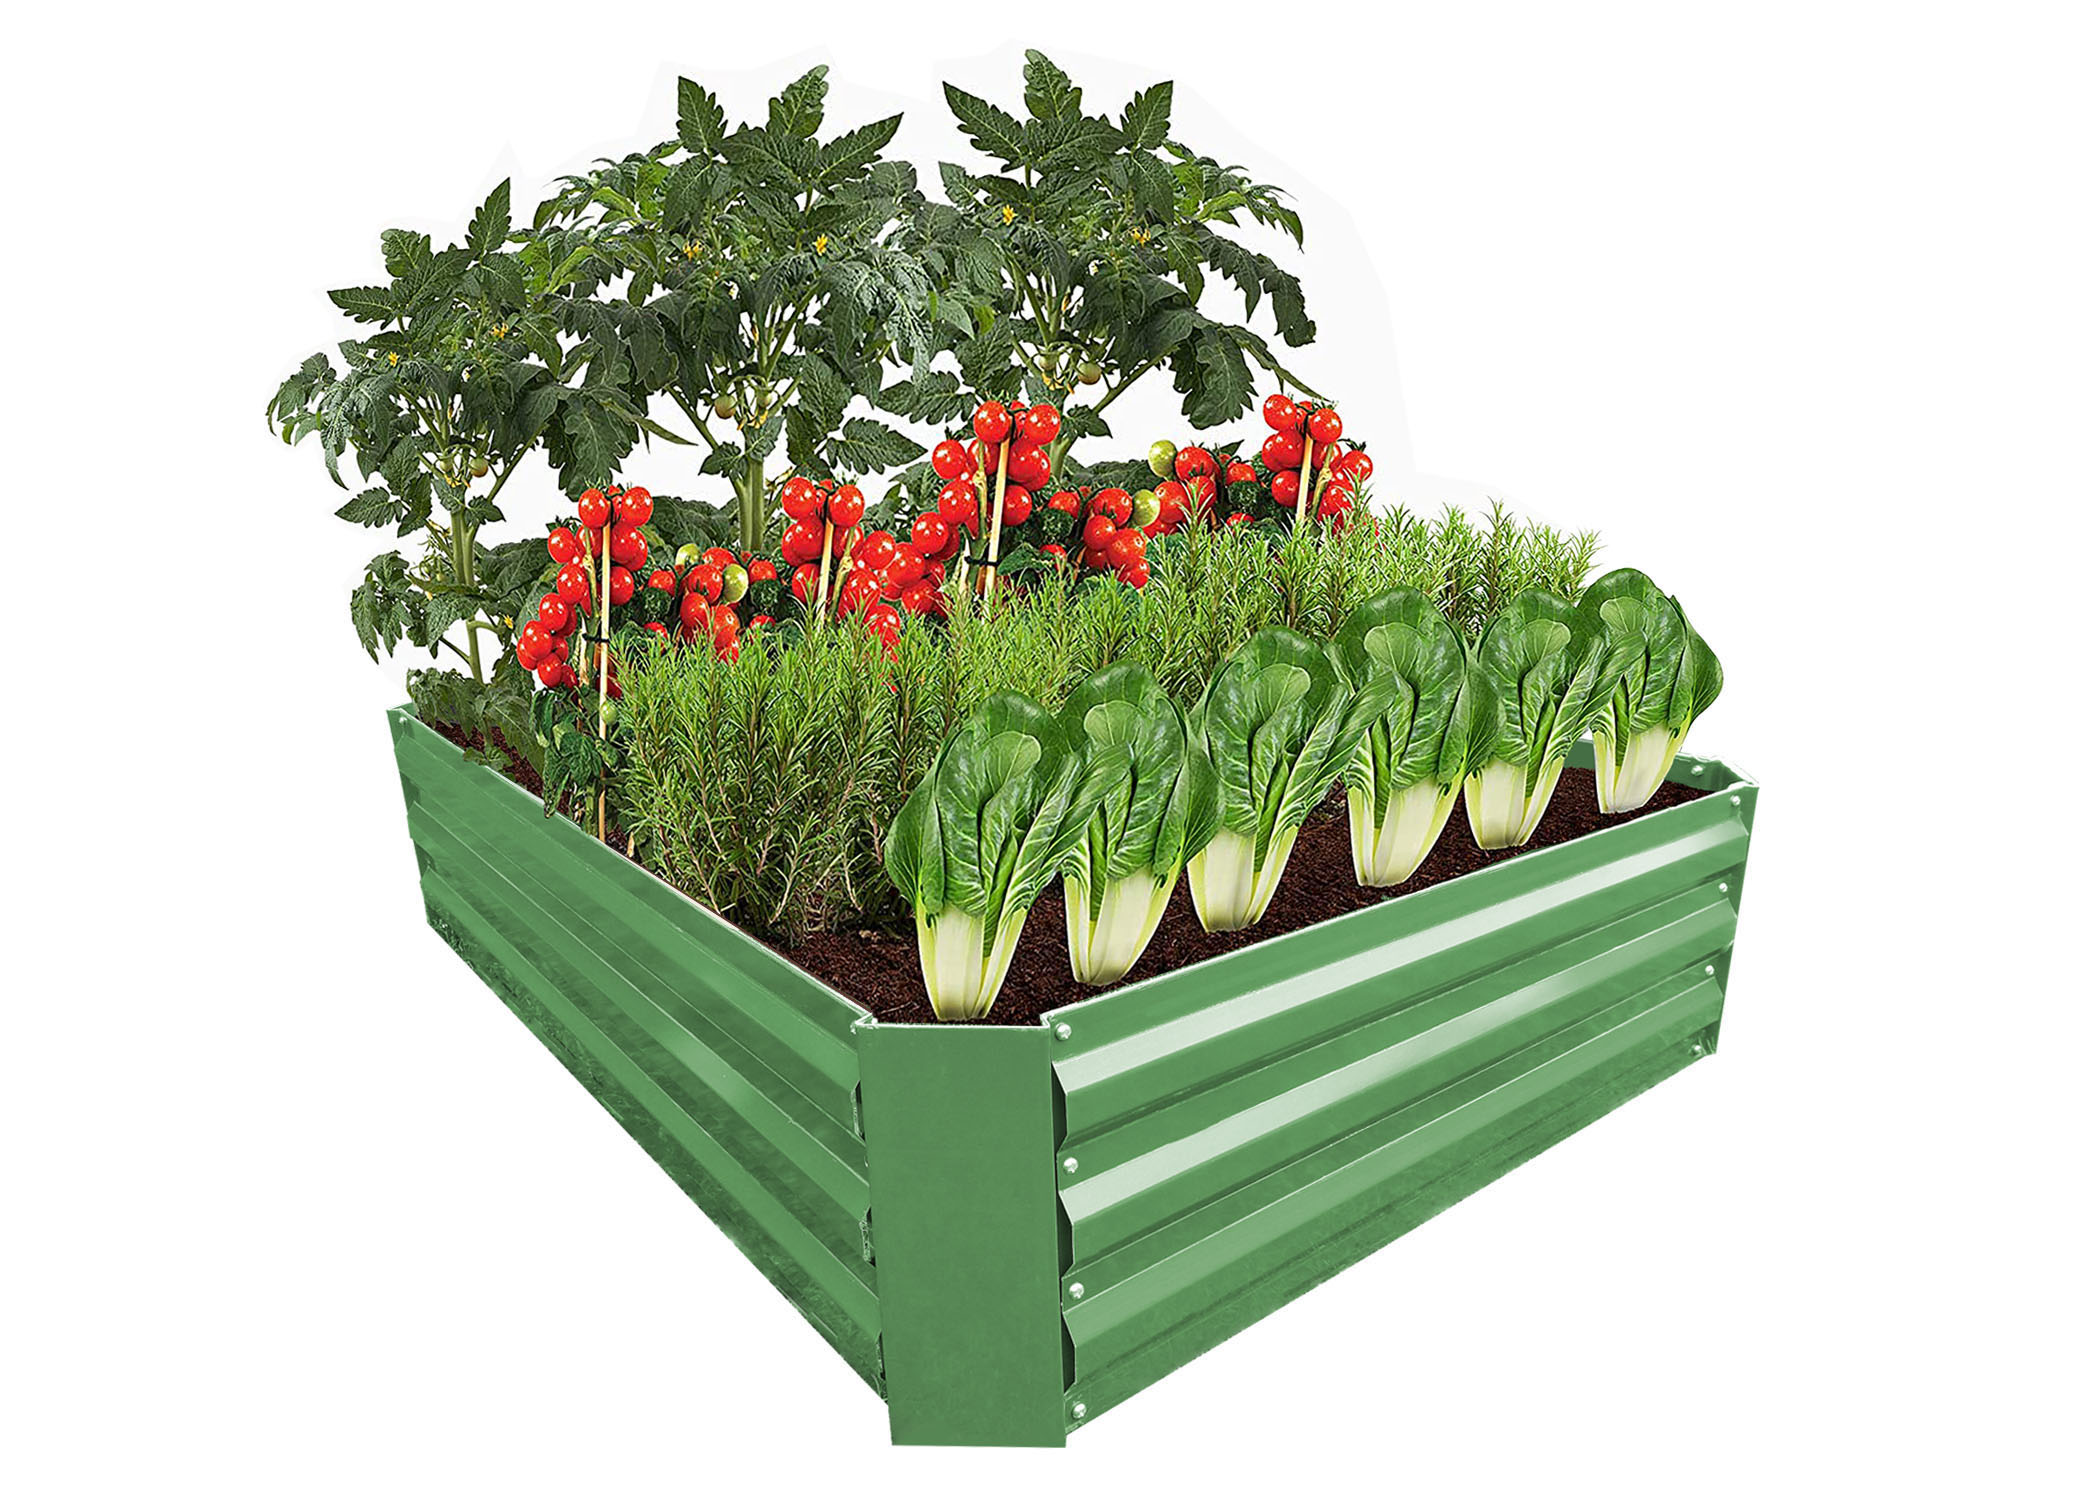 Zenport WS1003 Raised Bed Kit, Green, 39.4 X 39.4 X 11.8-Inches